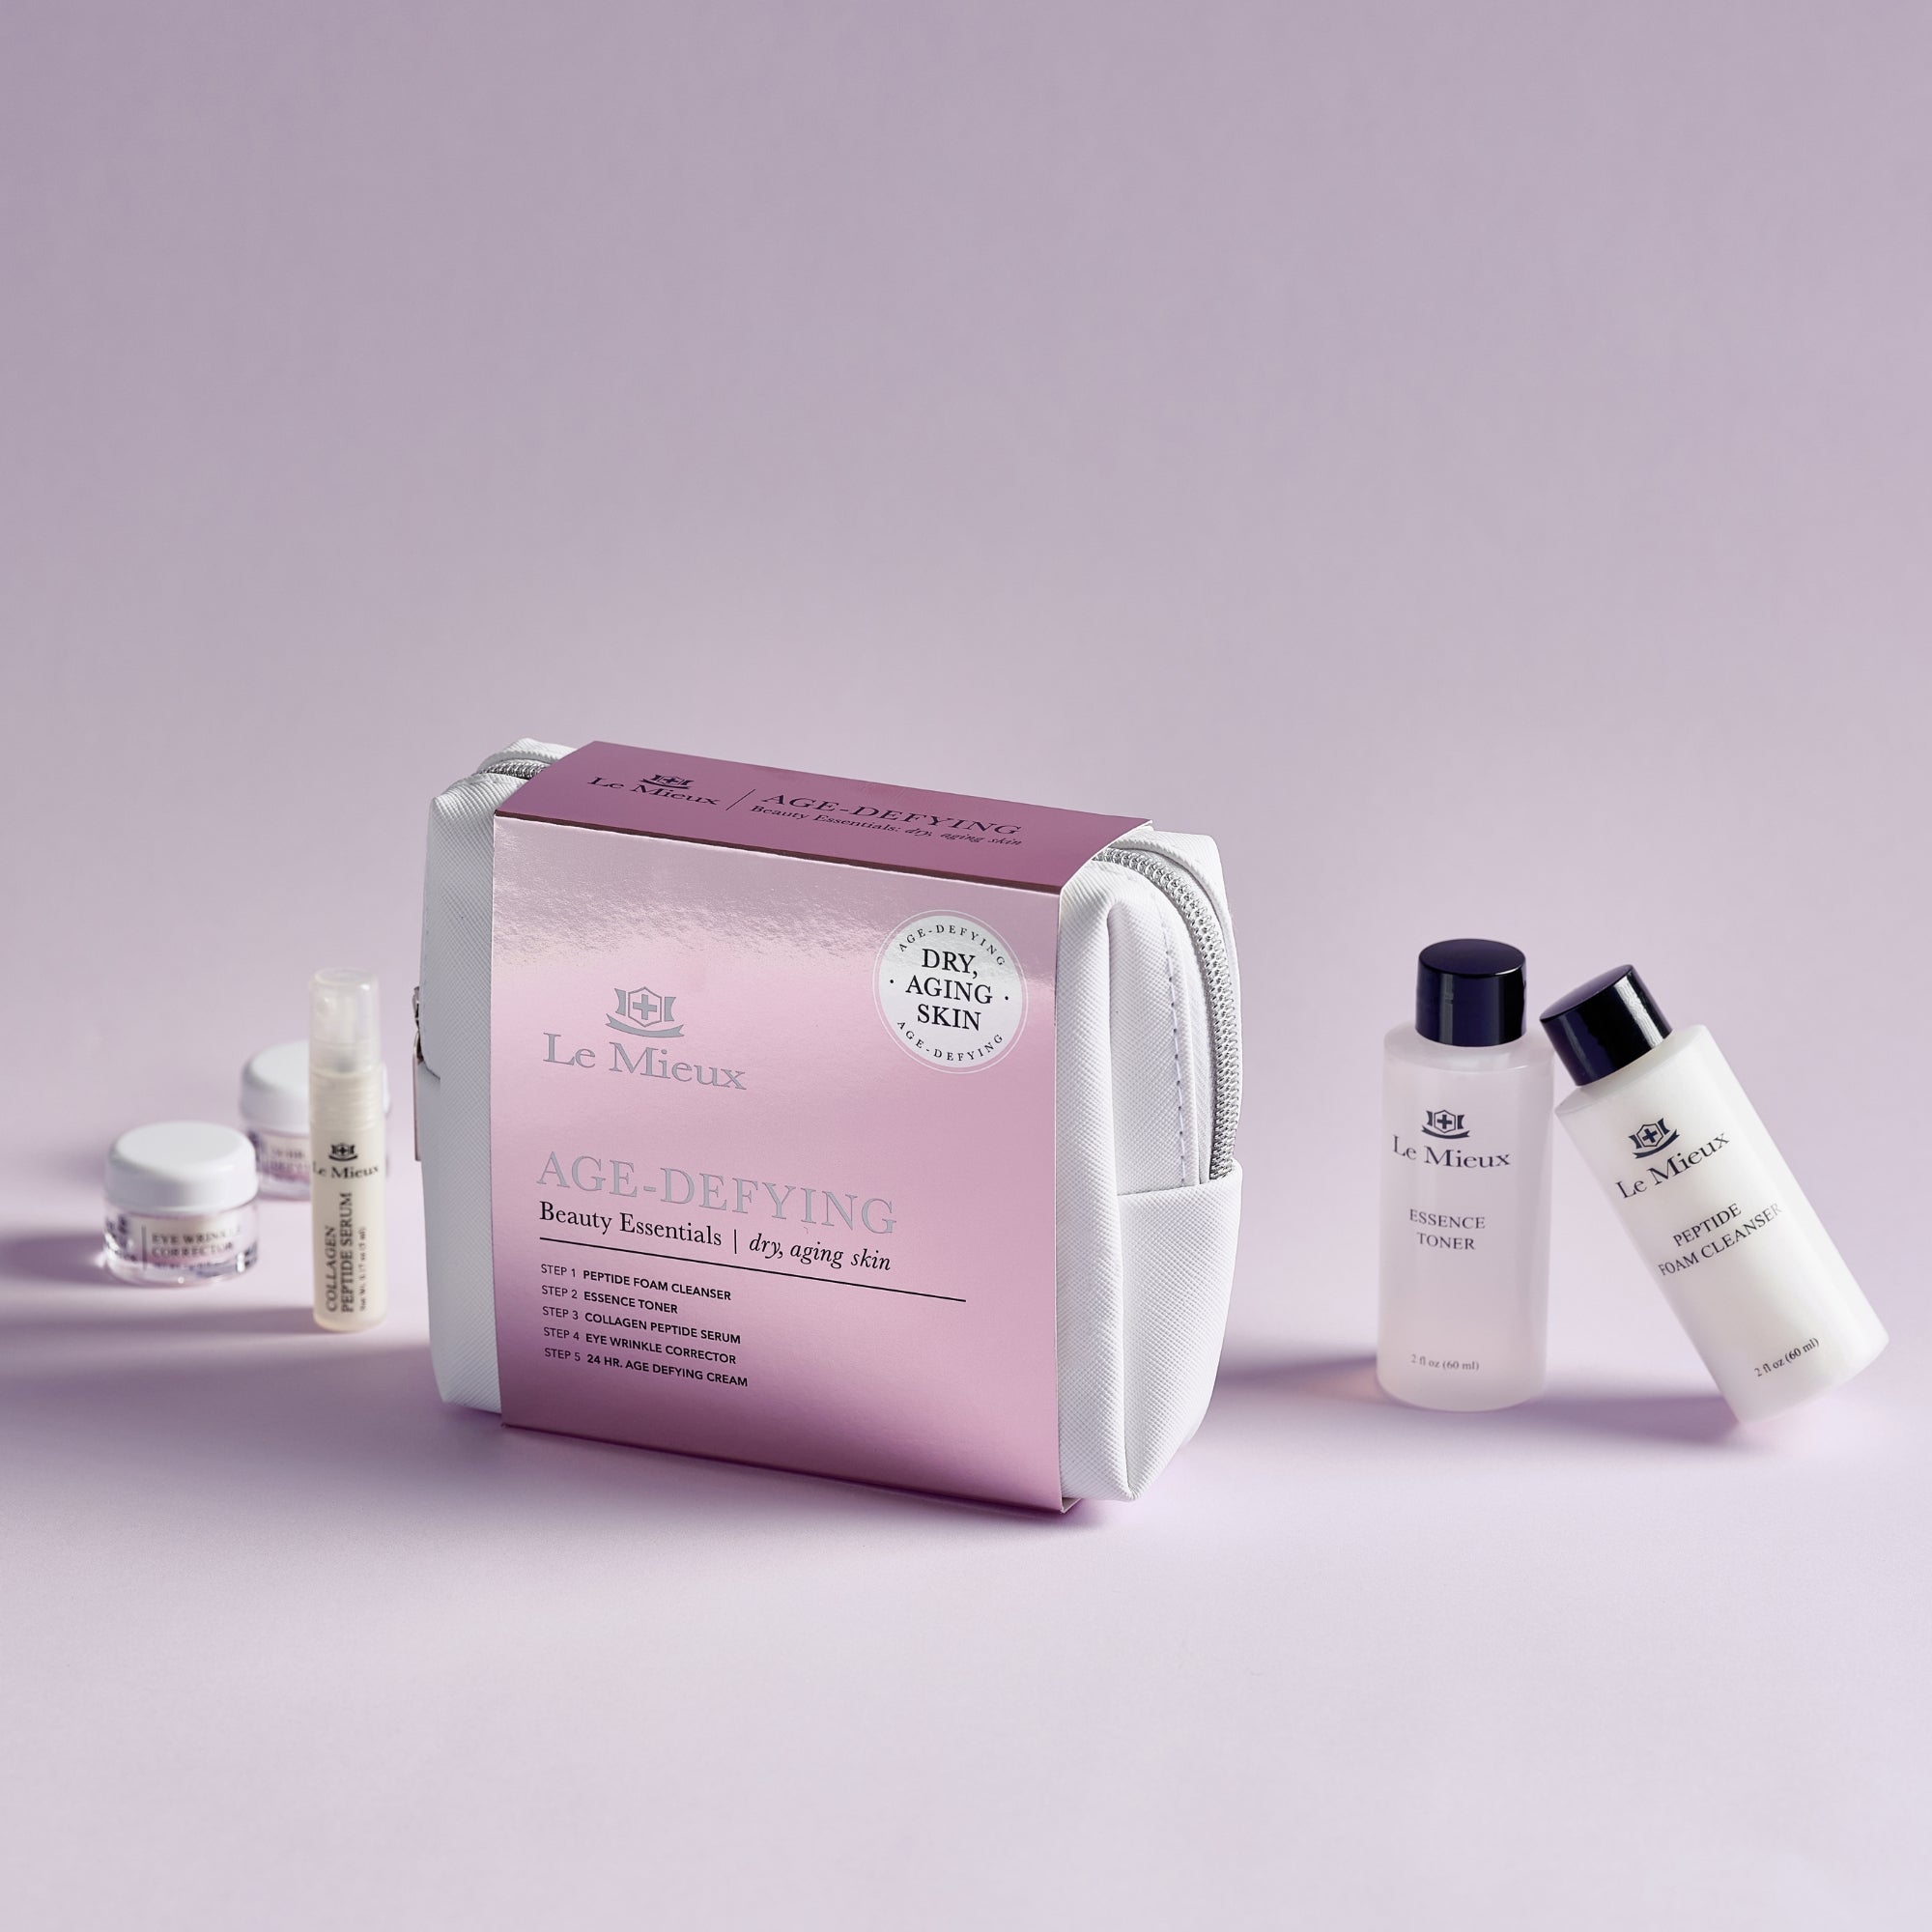  AGE-DEFYING BEAUTY ESSENTIALS from Le Mieux Skincare - 3